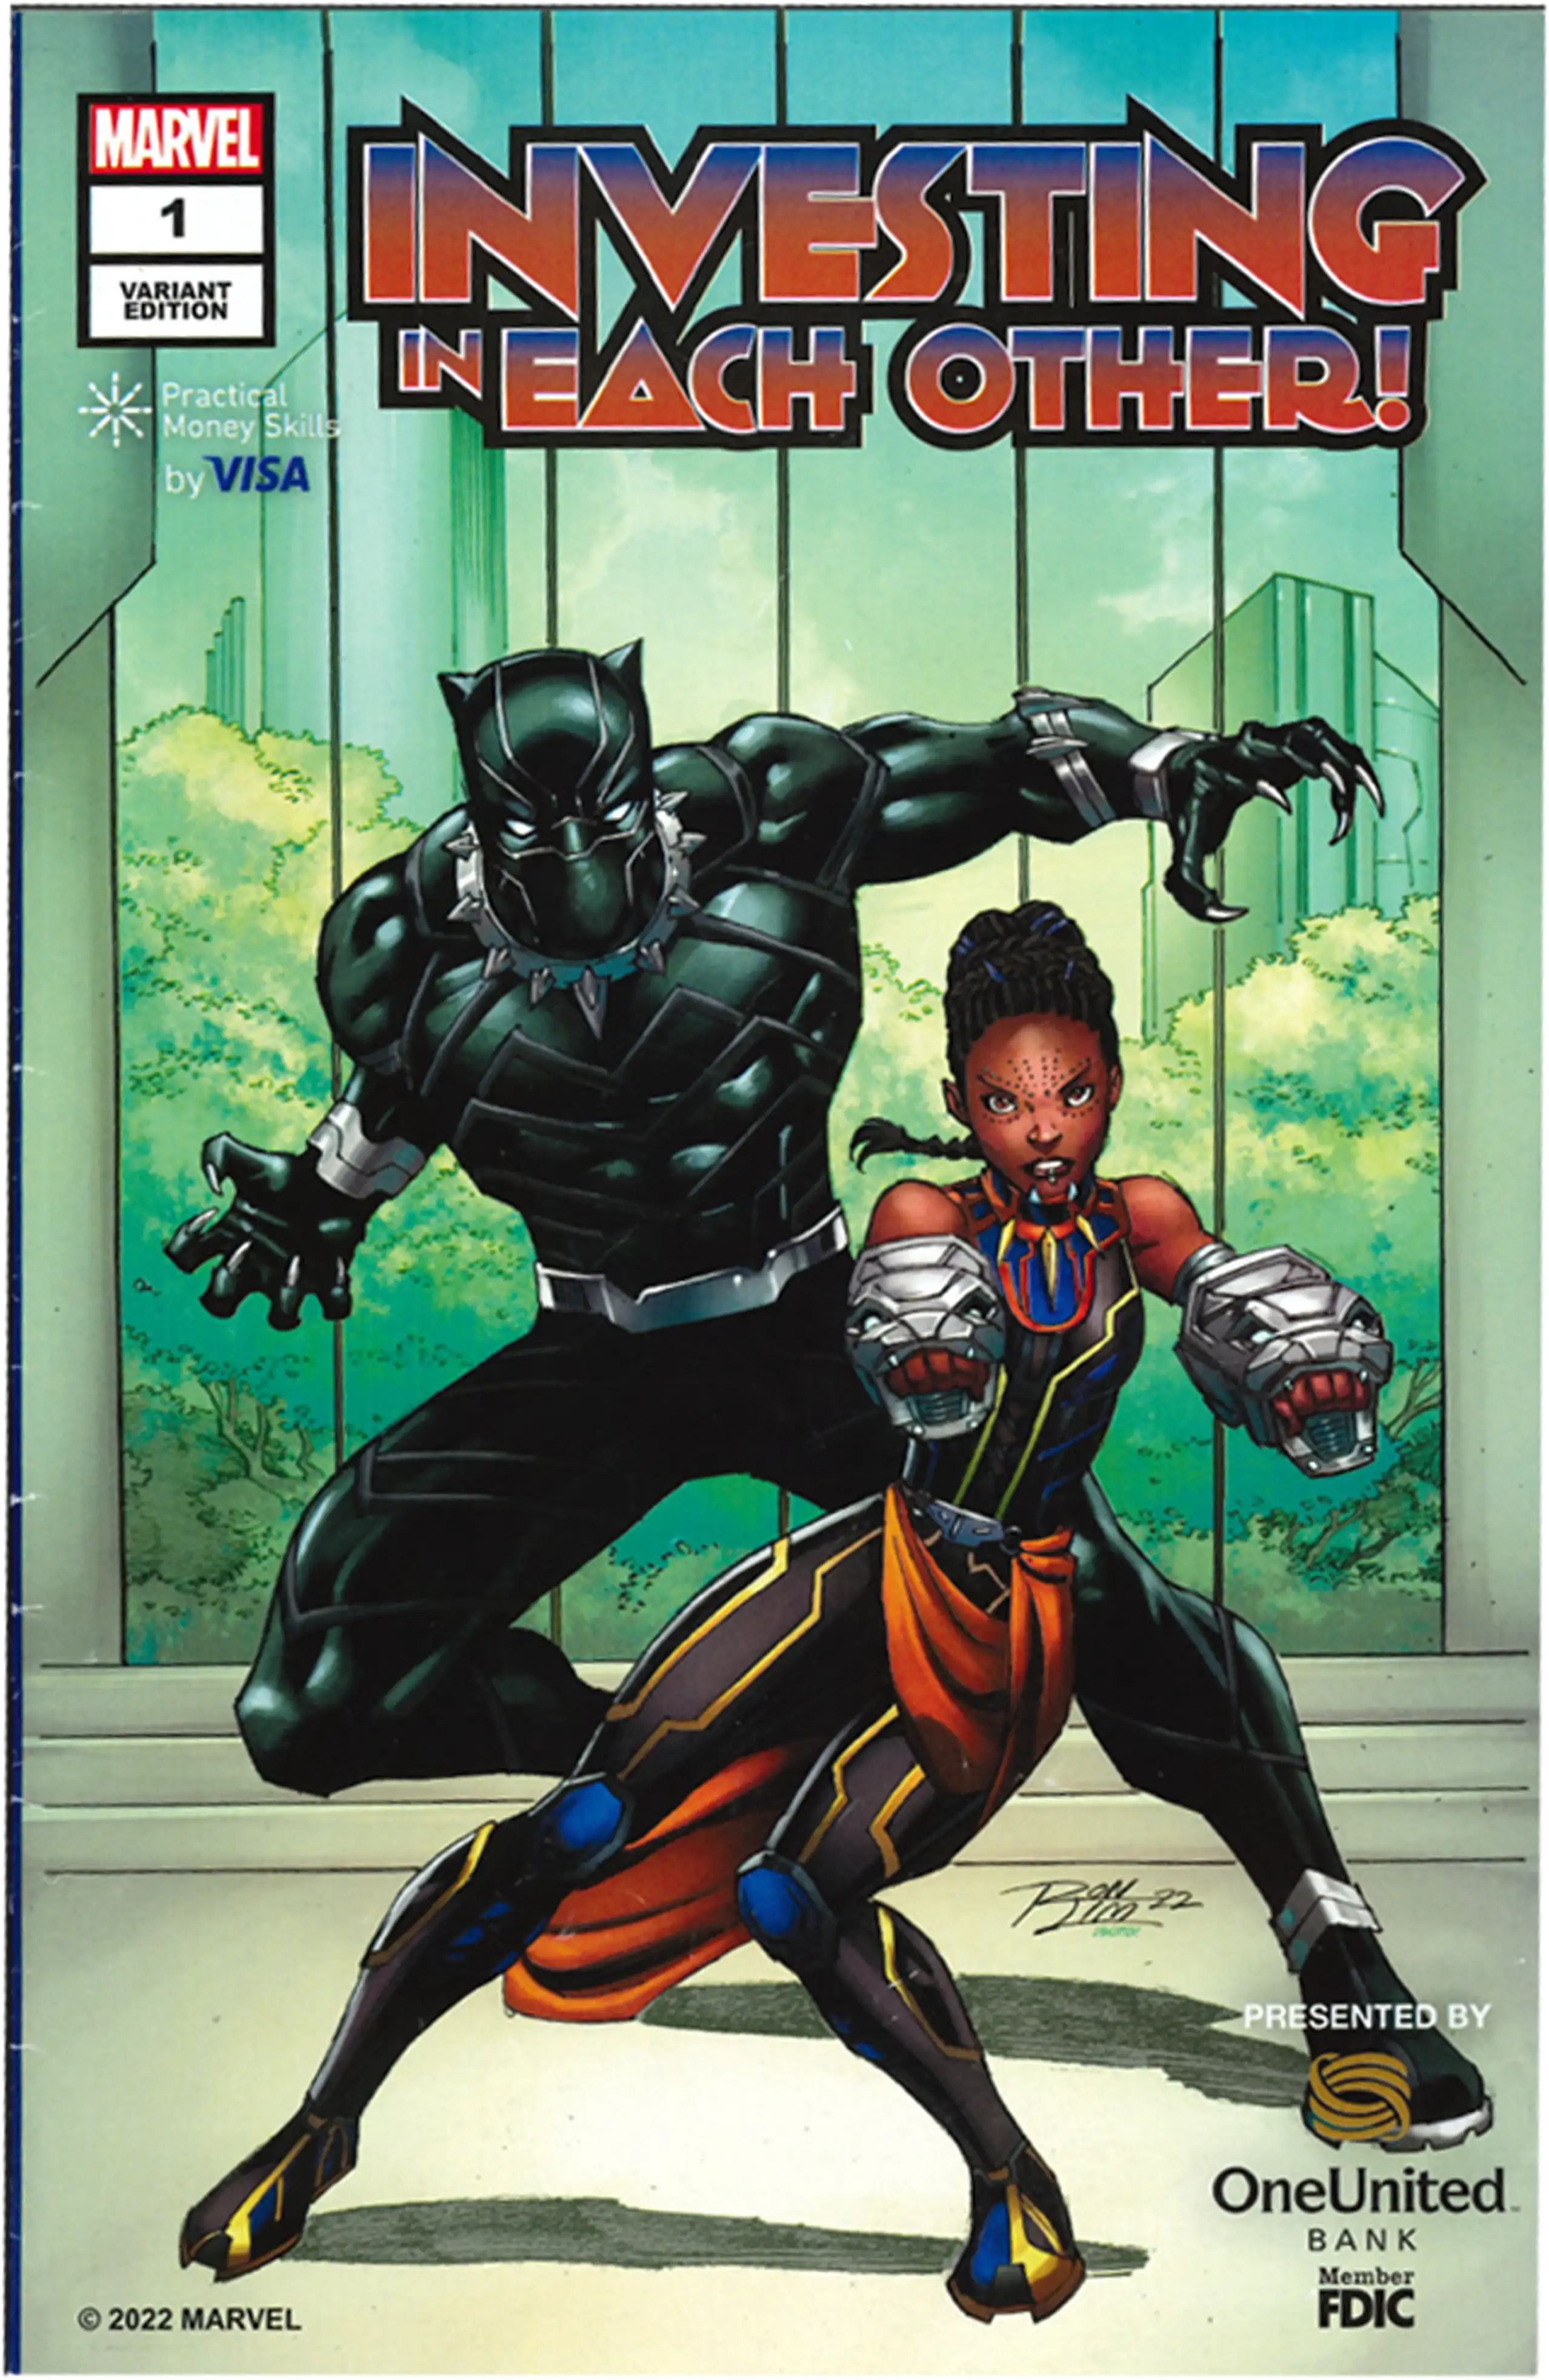 Black panther and shuri in dynamic superhero poses on a comic book cover titled "investing in each other," presented by oneunited bank.